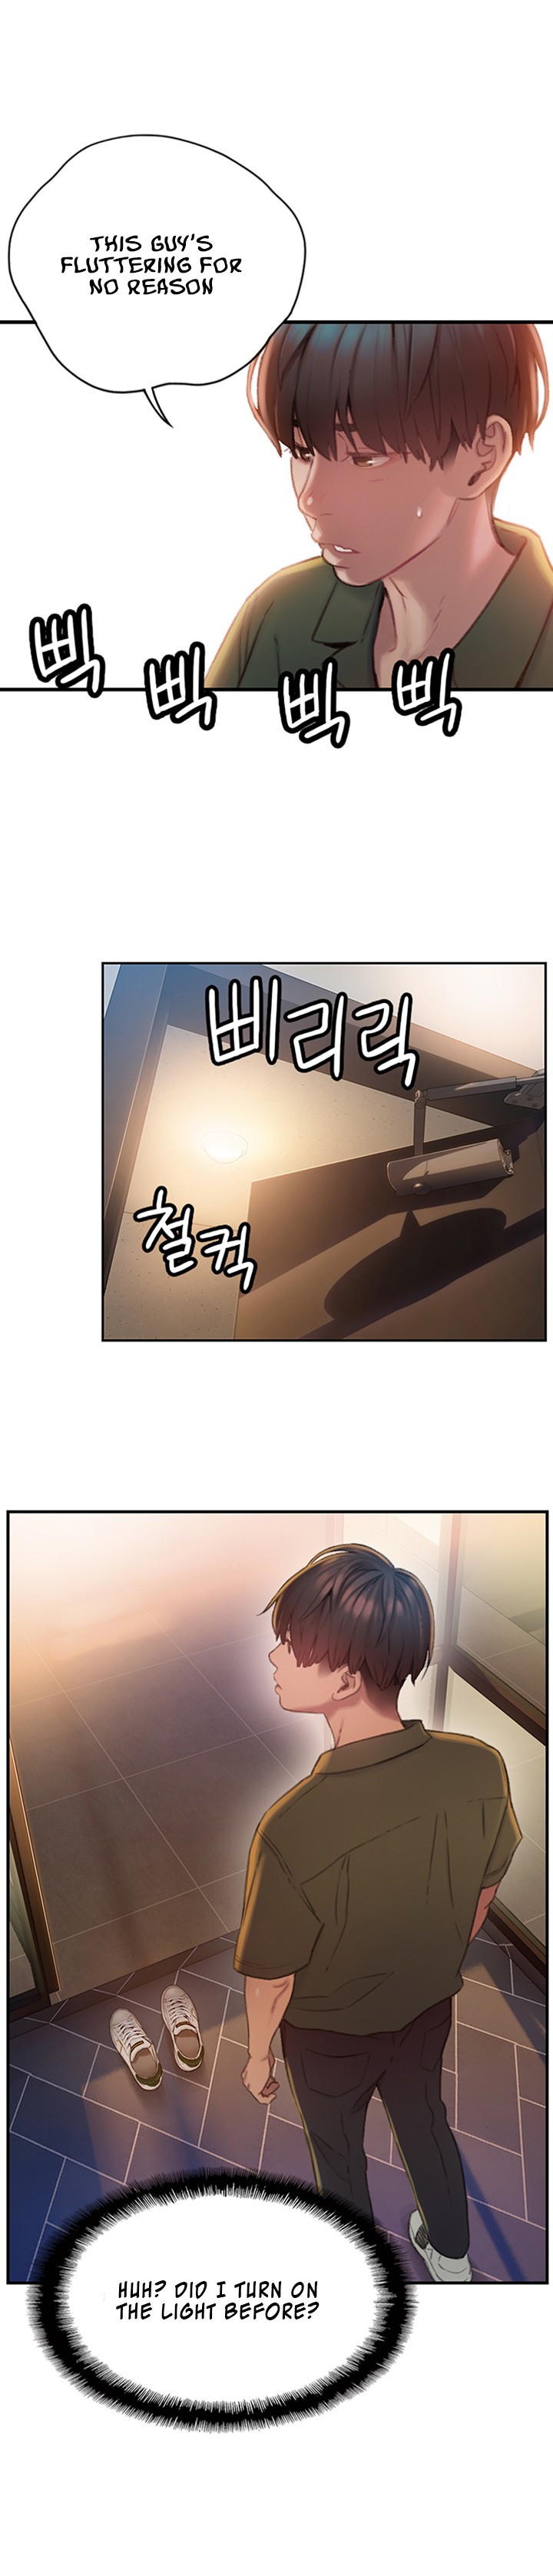 [Park Hyeongjun] Love Limit Exceeded (01-27) Ongoing - Page 31